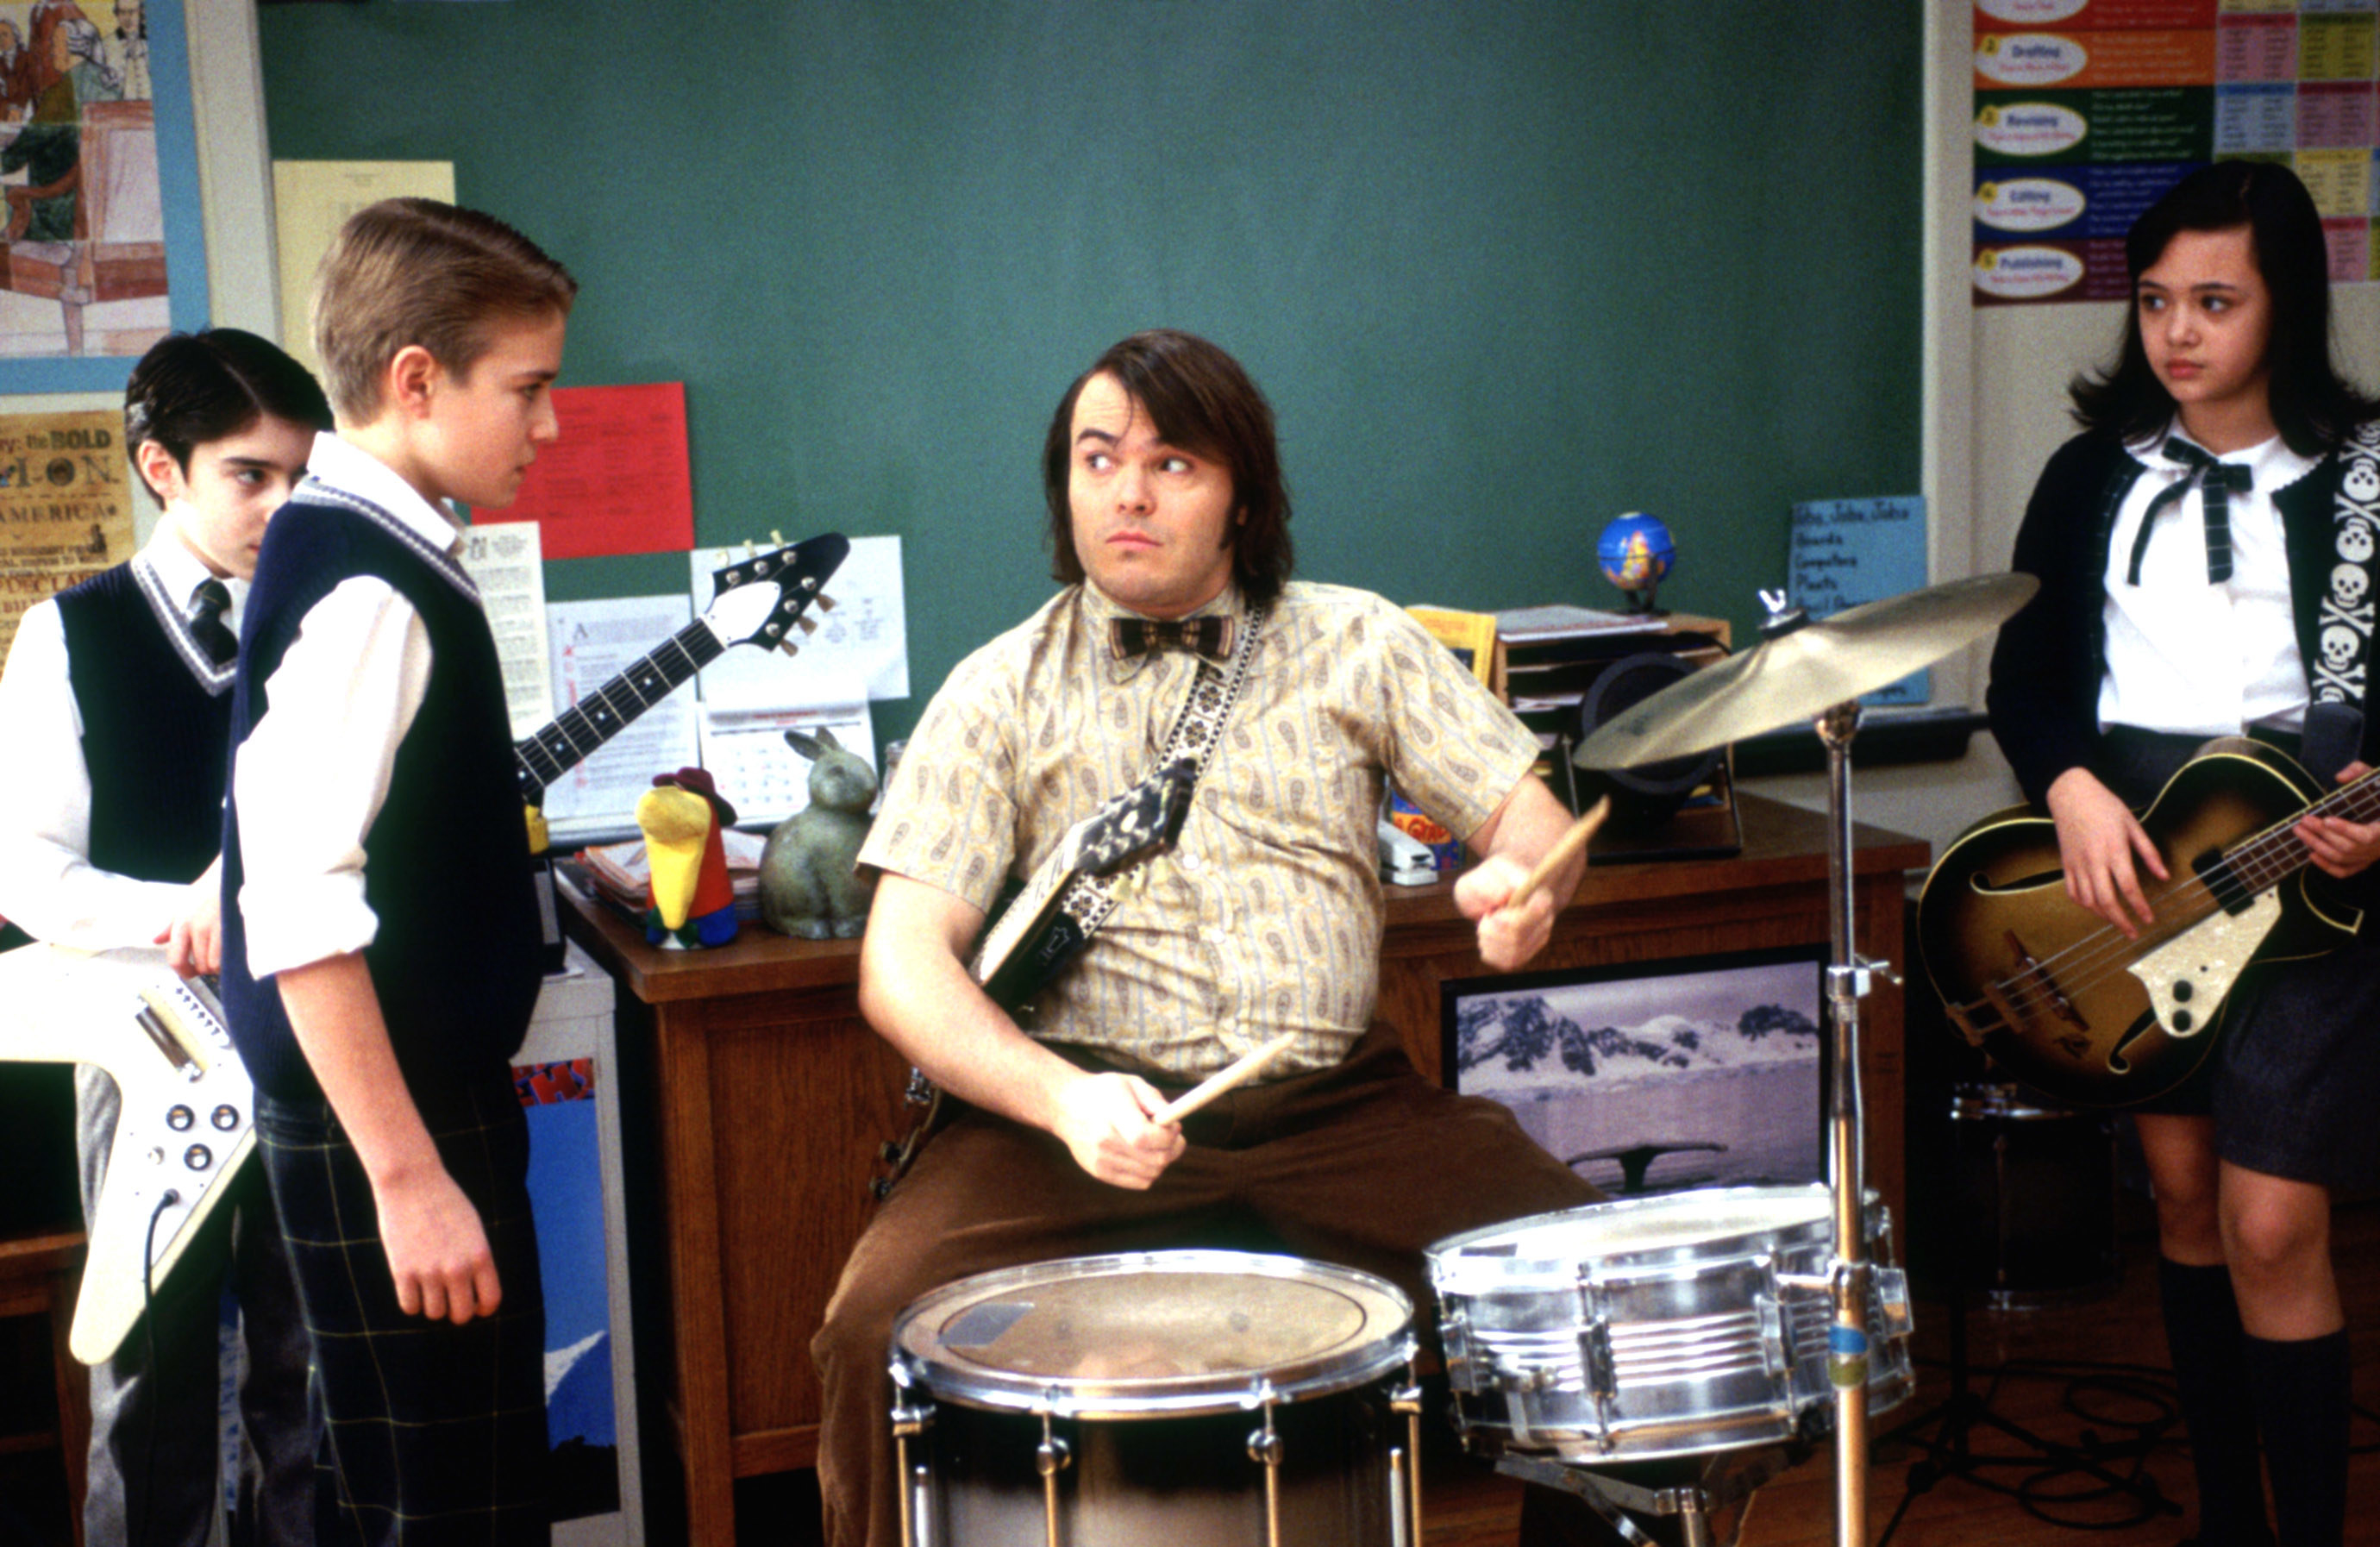 Jack Black sits at a drum set while the School of Rock children stand around him brandishing instruments